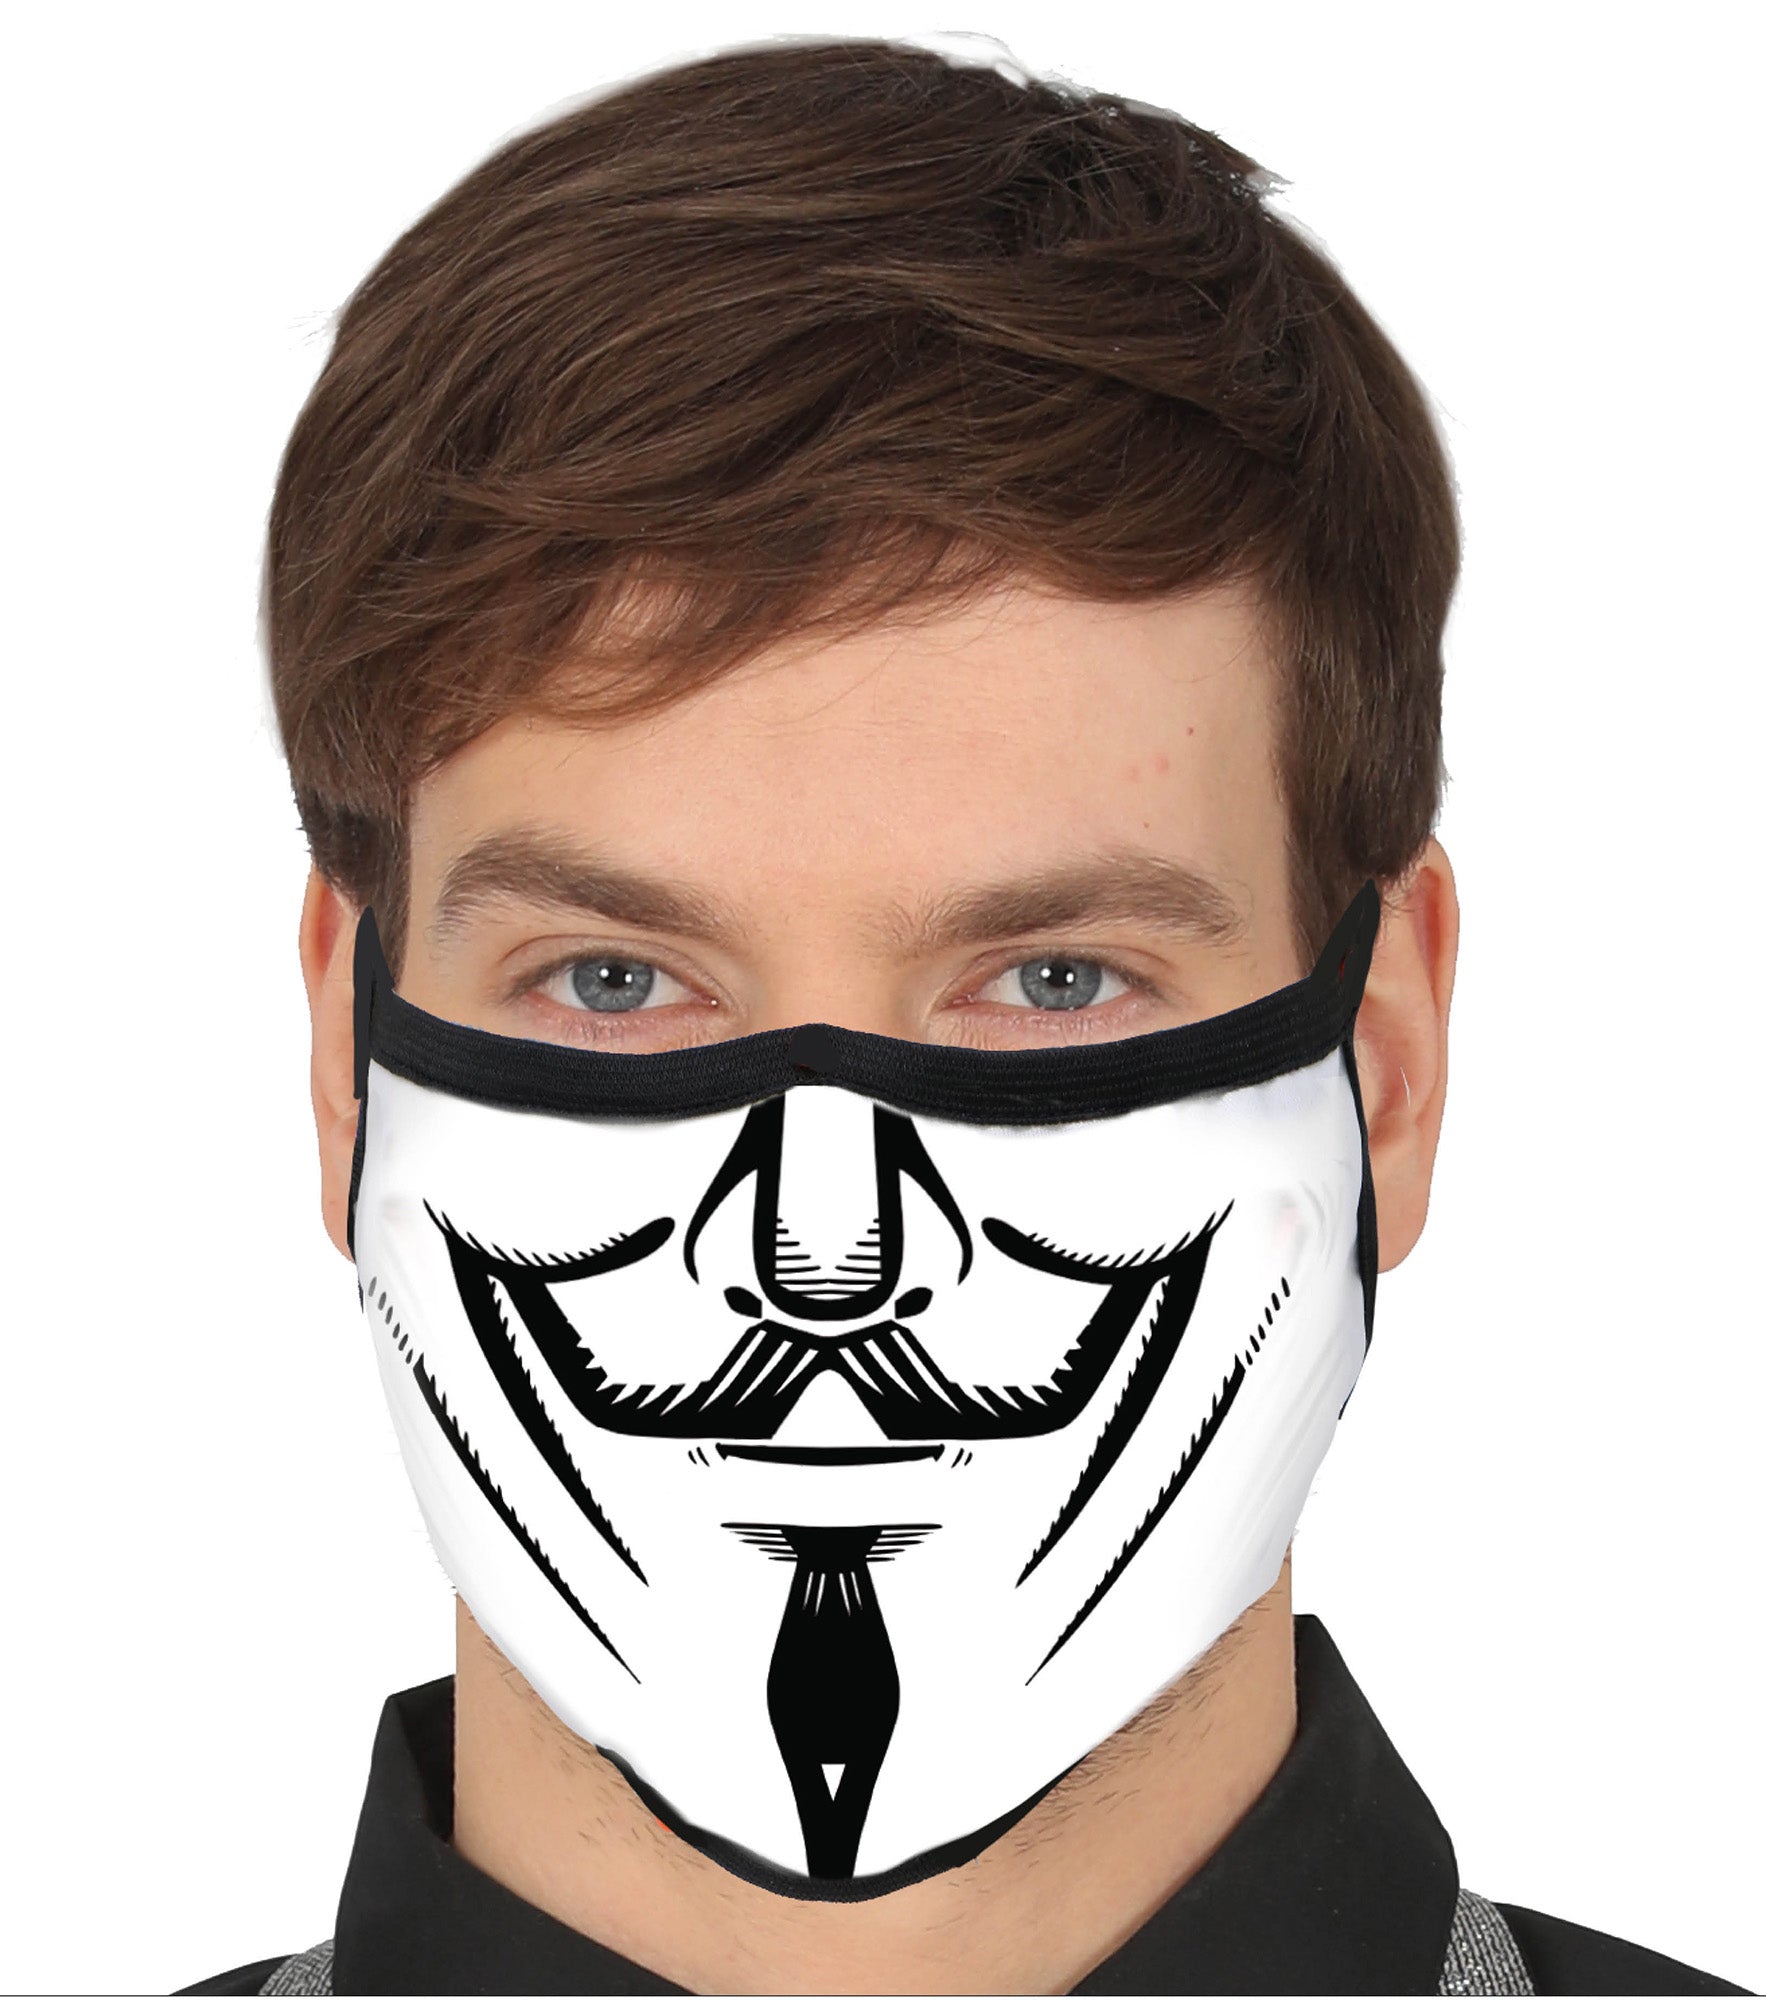 Anarchy Guy Fawkes V for Vendetta Face Mask